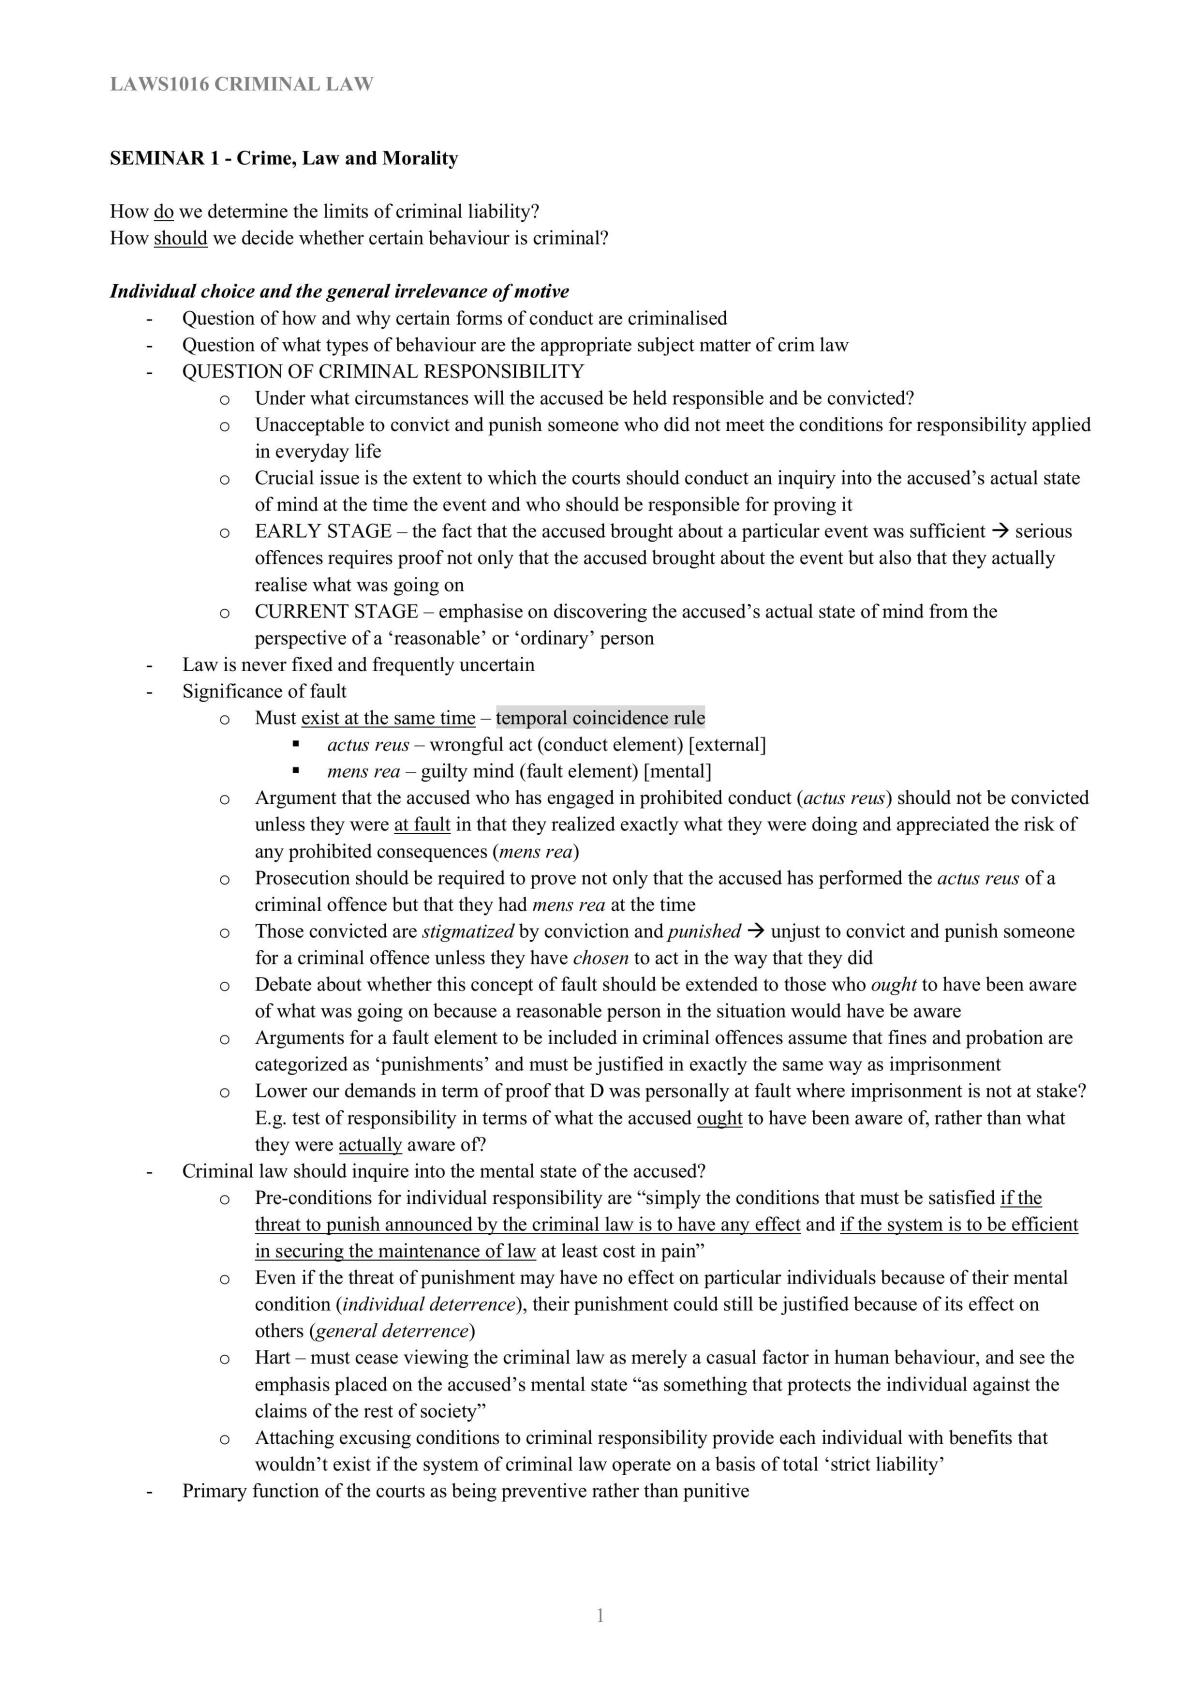 Full Notes for Criminal law - Page 1